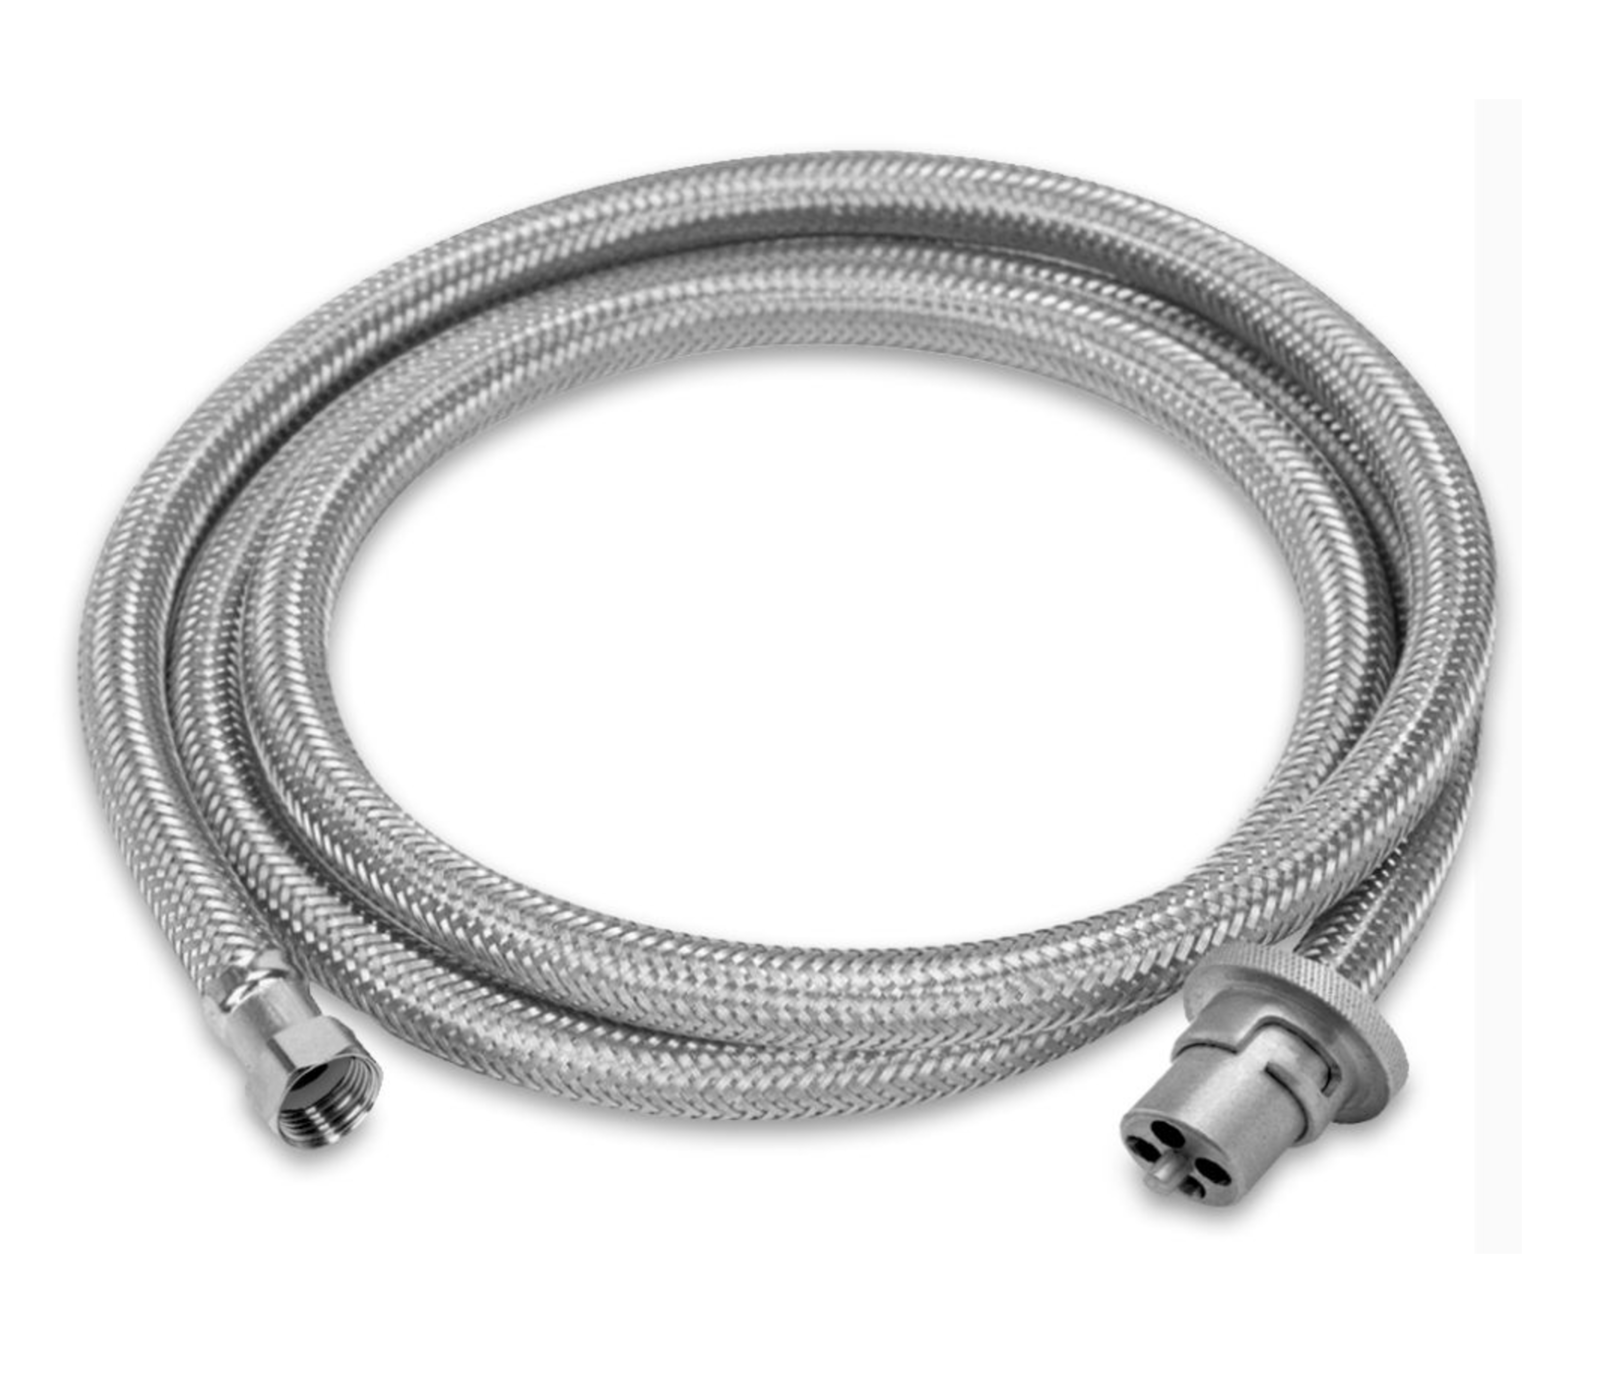 2MTR STAINLESS STEEL BRAIDED GAS HOSE 3/8 BSP W/ BAYONET COUPLING NATURAL & LPG 